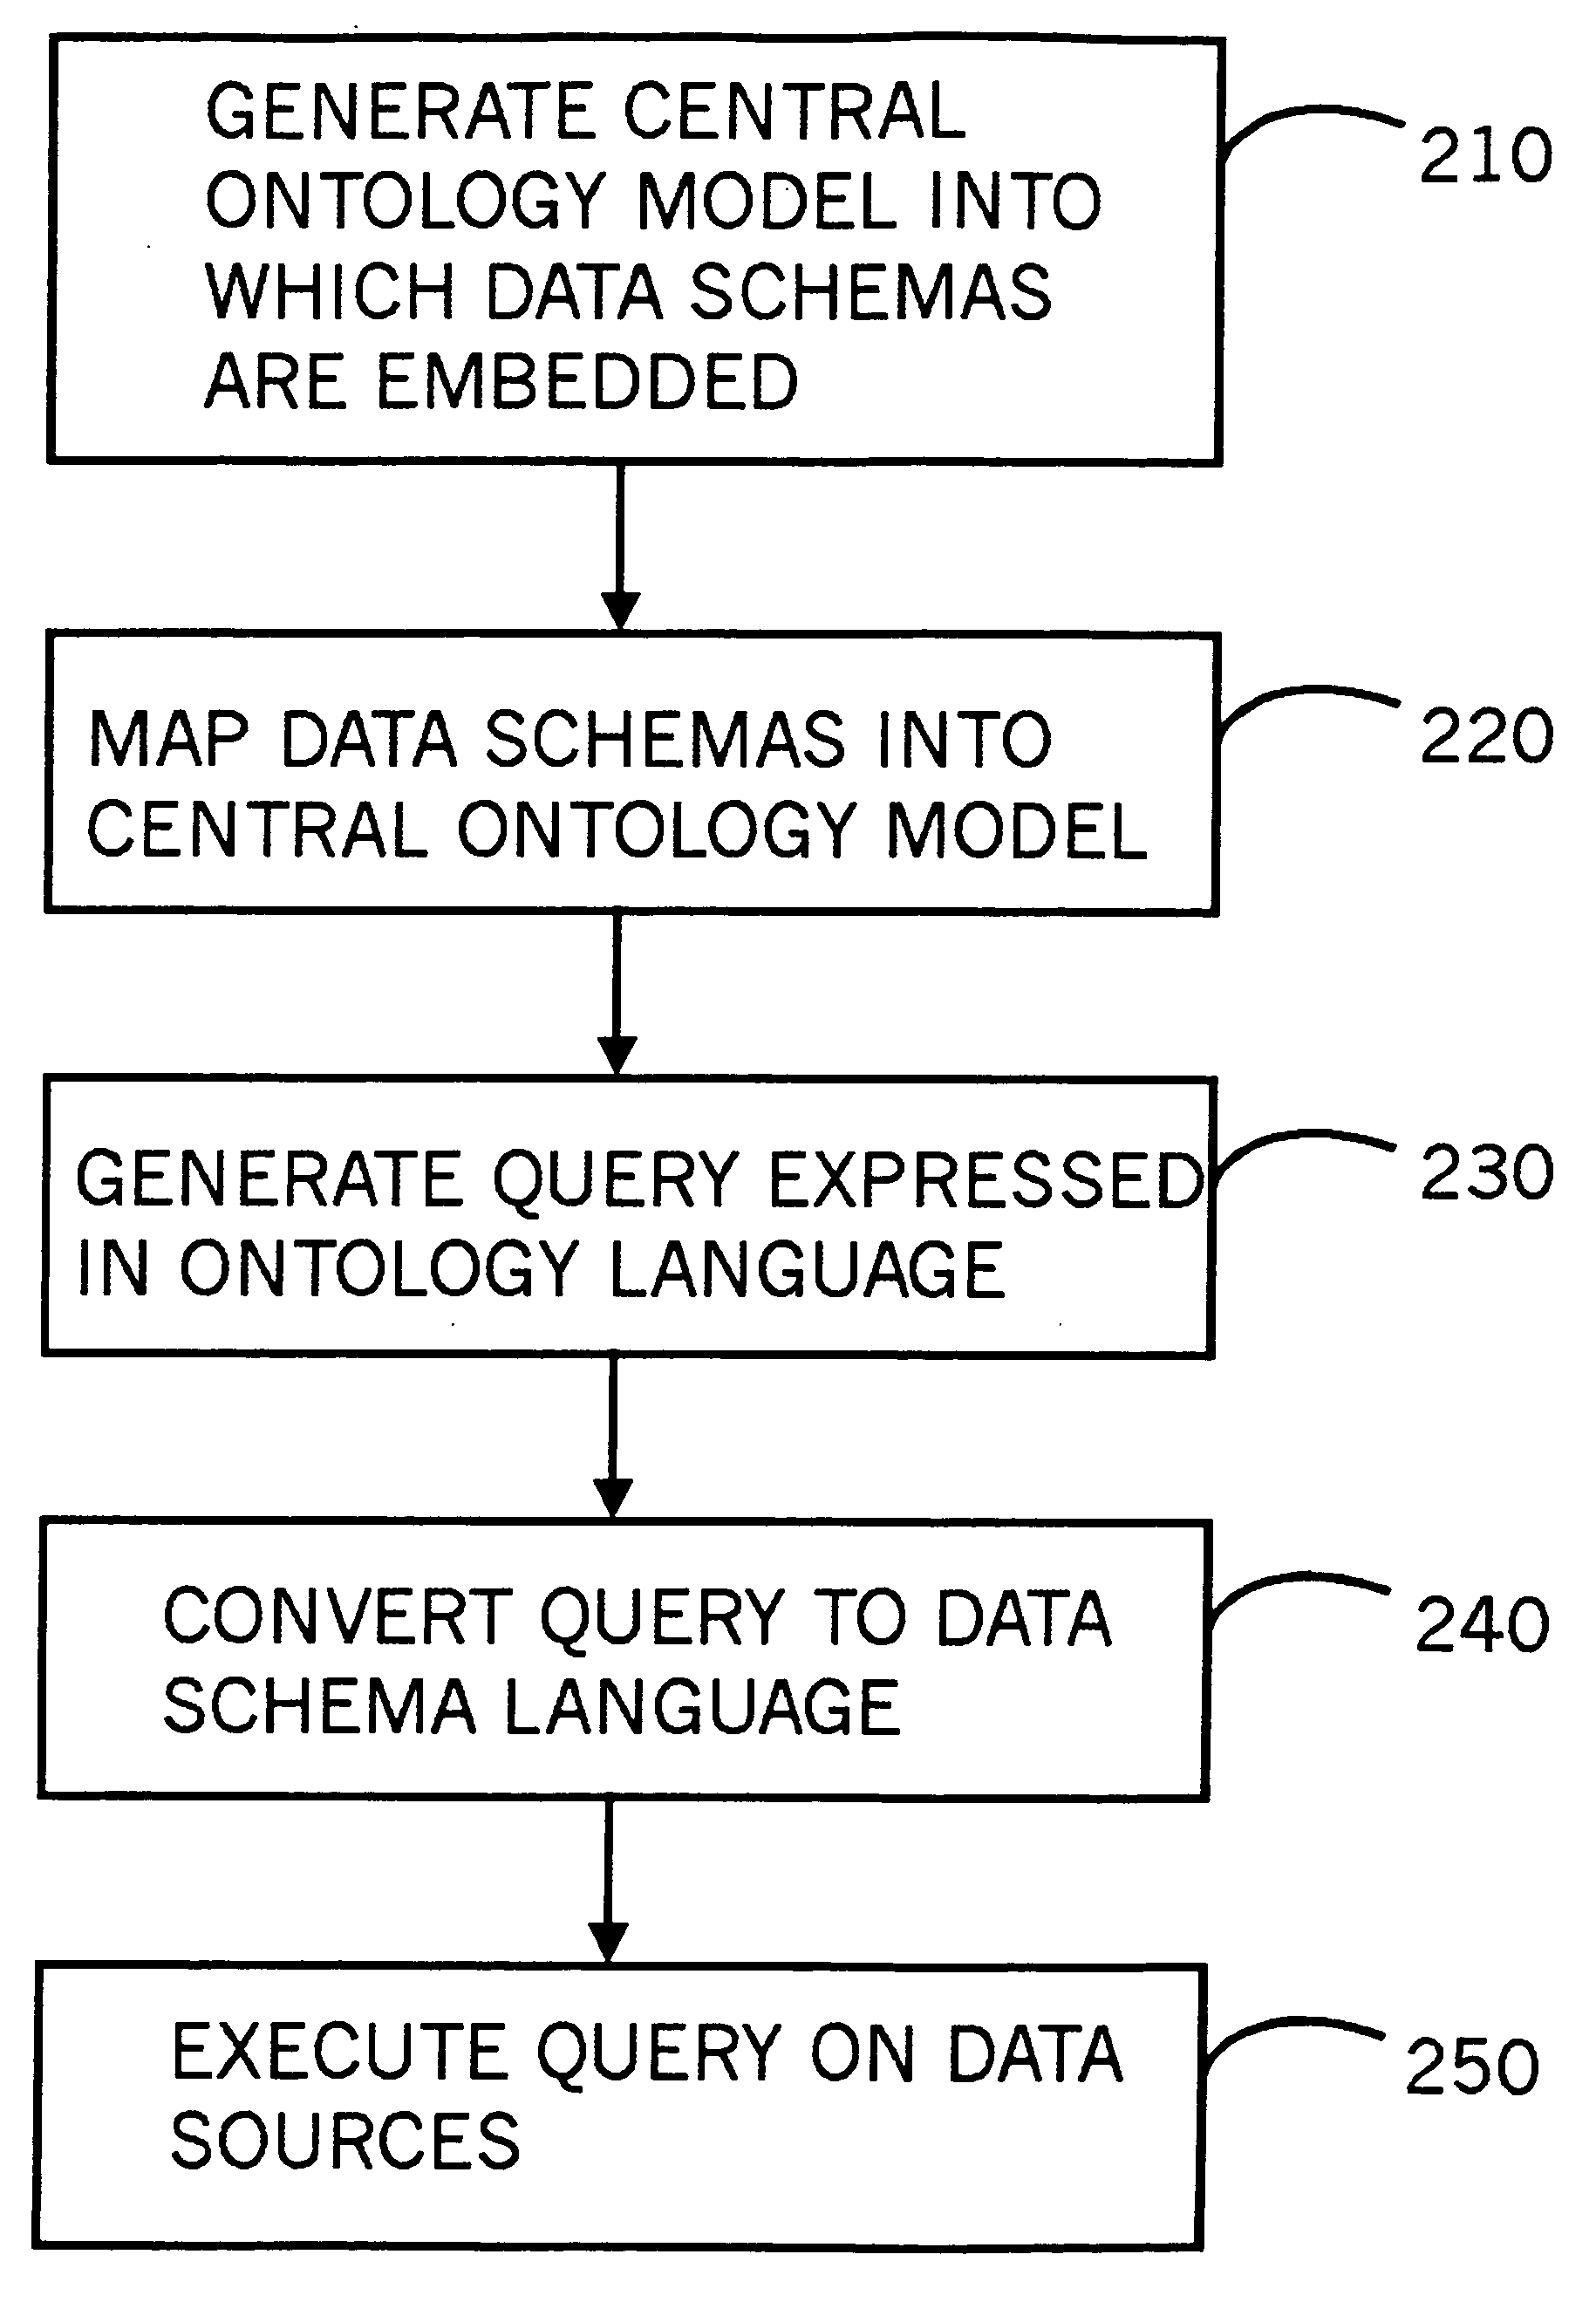 Data query and location through a central ontology model